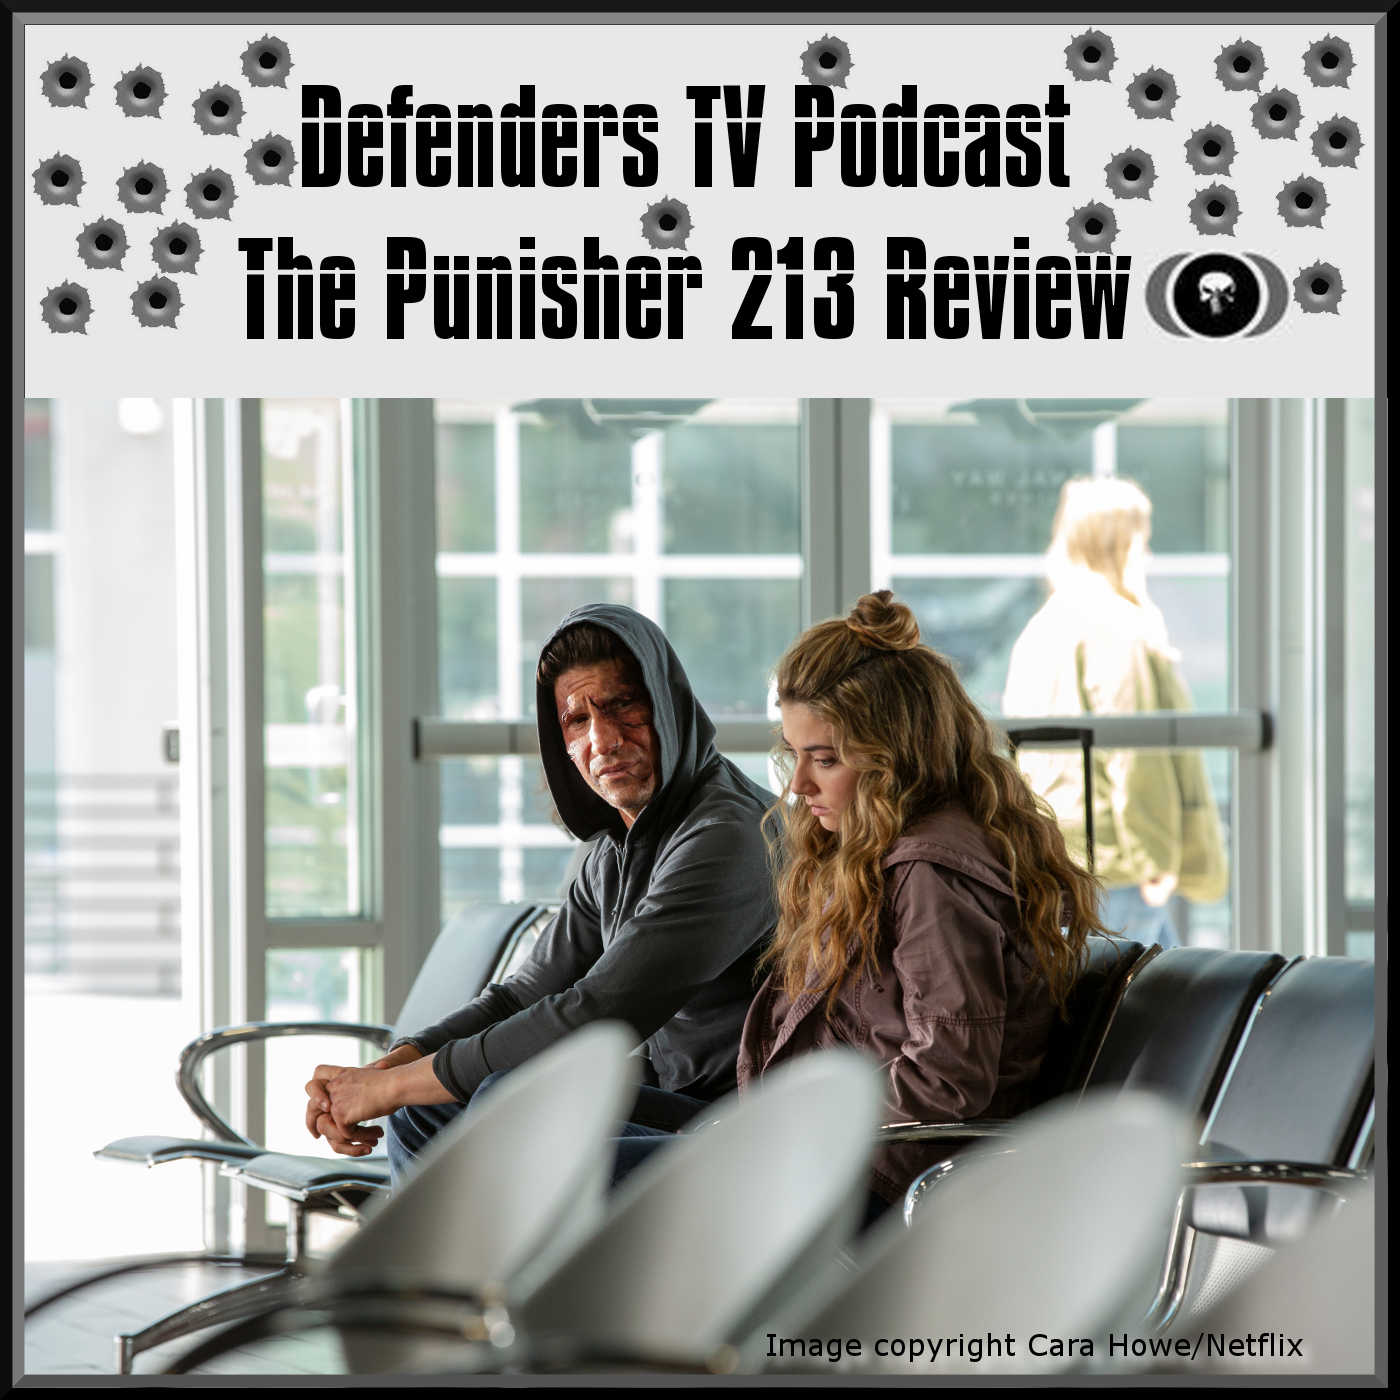 Punisher Season 2 Finale Episode 13 ”Collision Course” by TV Podcast Industries